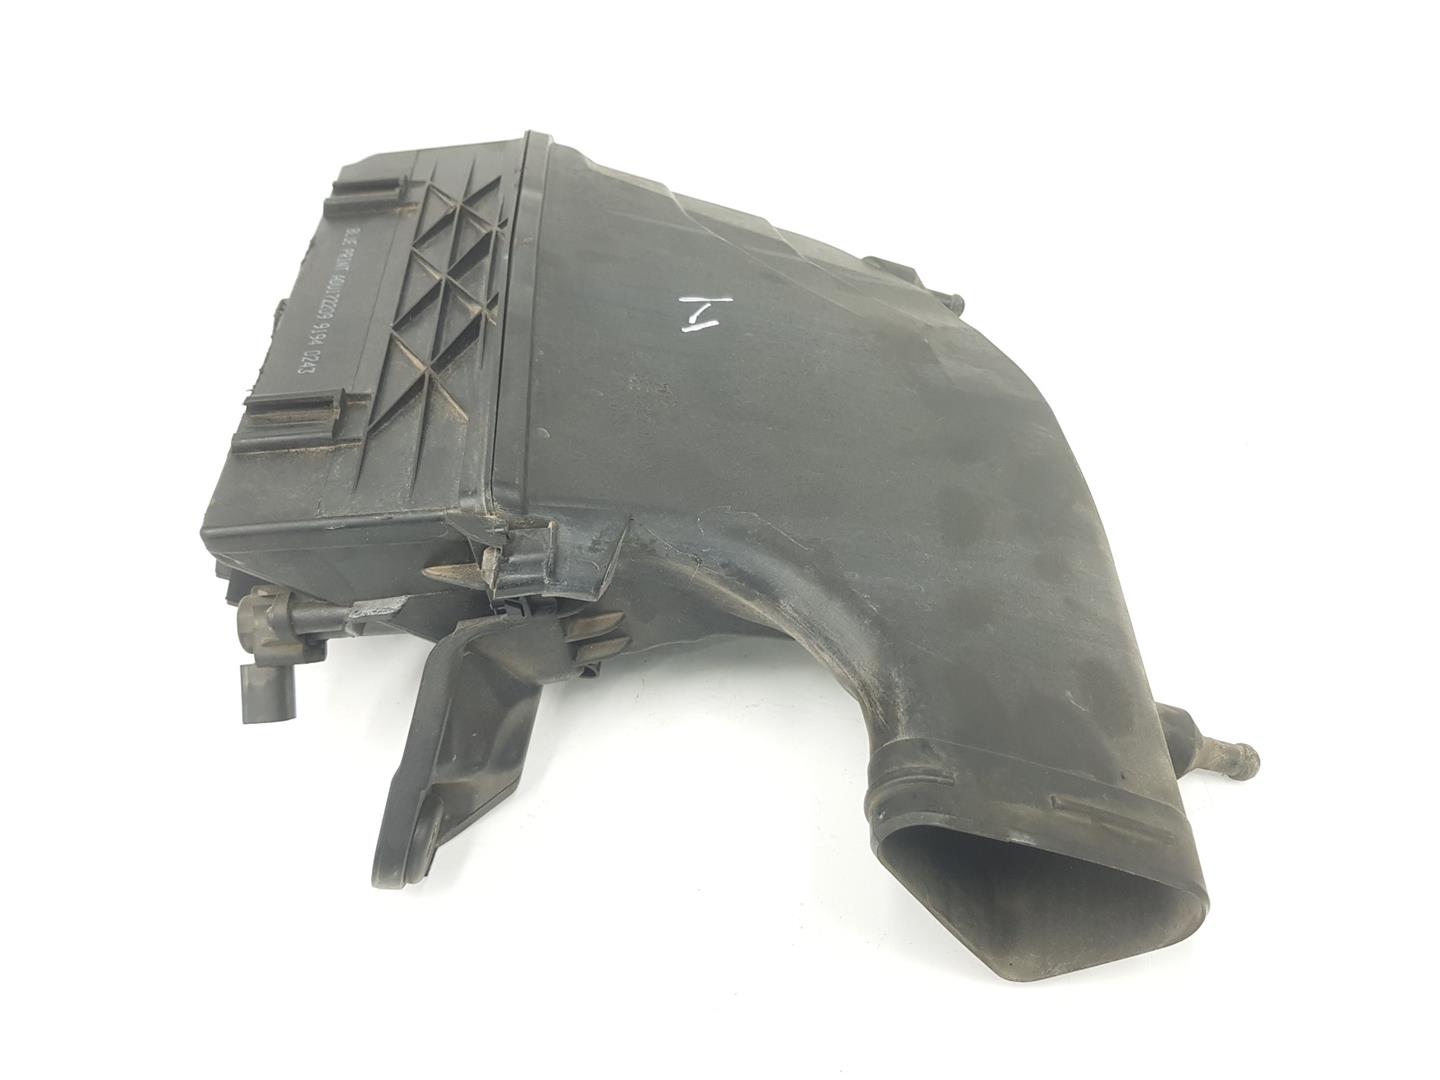 MERCEDES-BENZ M-Class W164 (2005-2011) Other Engine Compartment Parts A6420903301, A6420903301 24244152